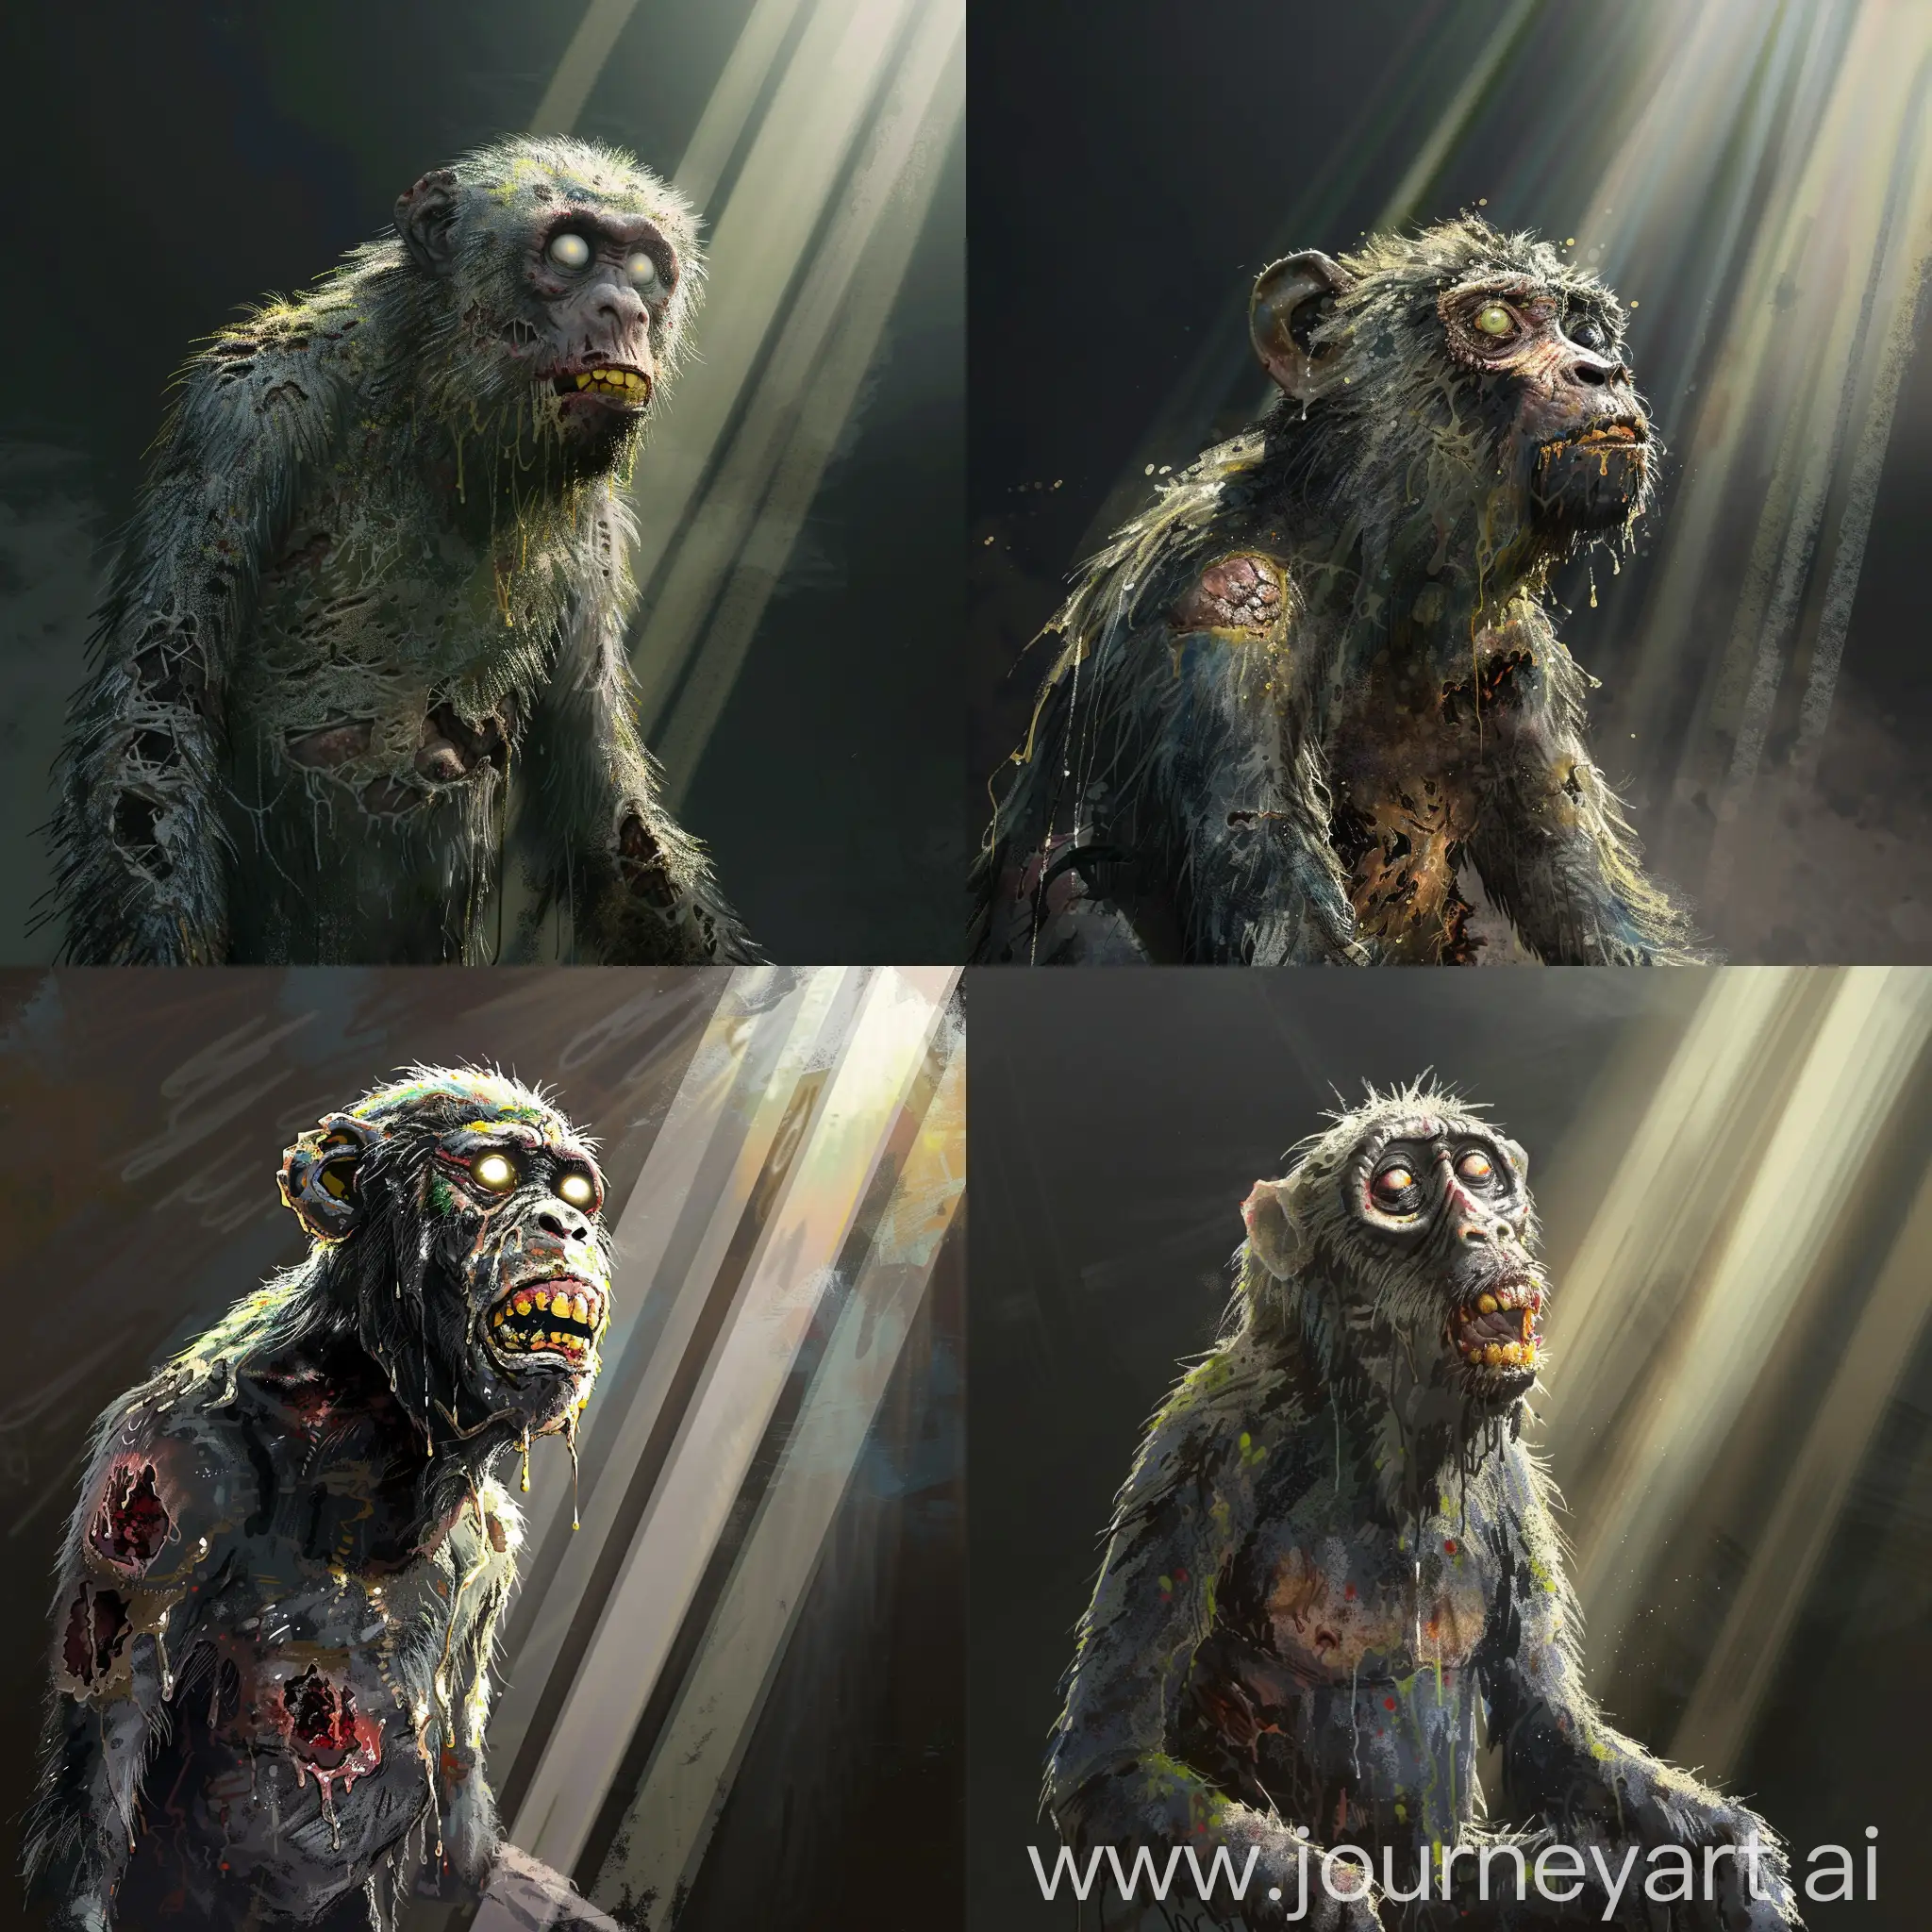 Creating a zombie hamadryad image in Renaissance style:  1. Lighting: - Narrow beams of light should come from the upper right corner of the image to partially illuminate the face and part of the upper torso of the zombie hamadryad. - The shadows should be deep and add drama to the image, emphasizing the terrible appearance of a zombified baboon.  2. The color scheme: - Use shades of gray, green, yellow and black to convey a zombie atmosphere with rotting flesh and secretions. - Add white eyes and yellow teeth to create contrast and disgust.  3. Composition: - Place the zombie hamadryad in the center of the composition to attract the viewer's attention and create a focus on its terrible appearance with wet fur and torn shreds. - Let the arms hang down to add an element of chaos and horror to the image.  4. Mood: - The atmosphere should be stuffy and disgusting in order to cause the viewer to feel horror and disgust in front of the zombie hamadryad. - Details of rotting flesh, secretions and blind eyes should emphasize the degeneration and terrible appearance of the creature.  The final image should be made in the Renaissance style, taking into account all the specified details and features of the terrible zombie hamadryad.